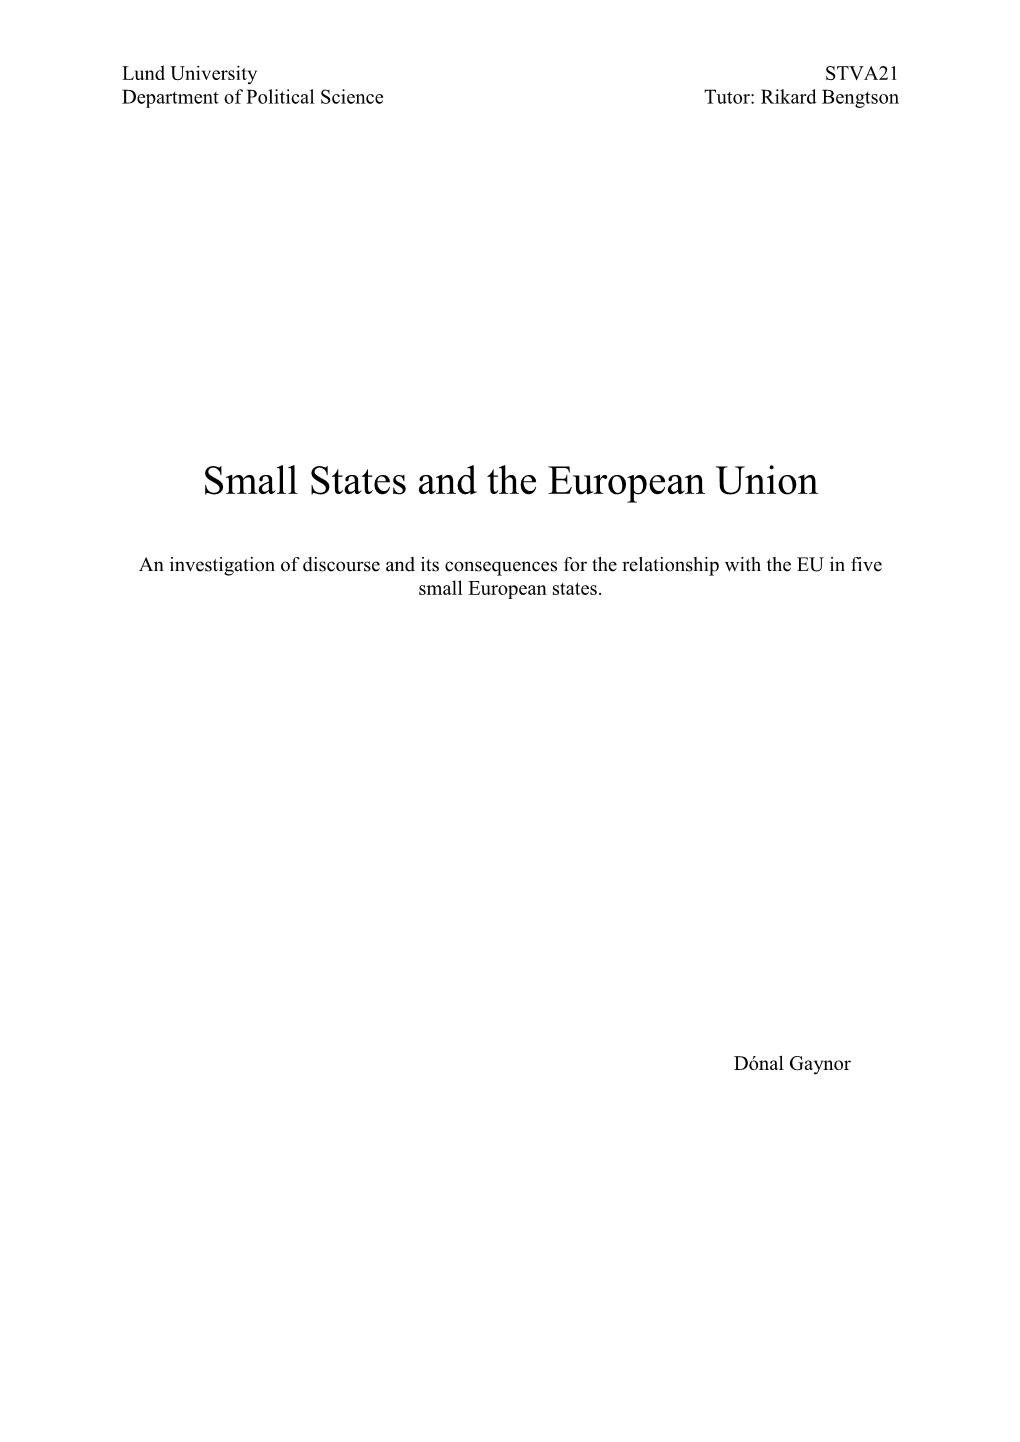 Small States and the European Union